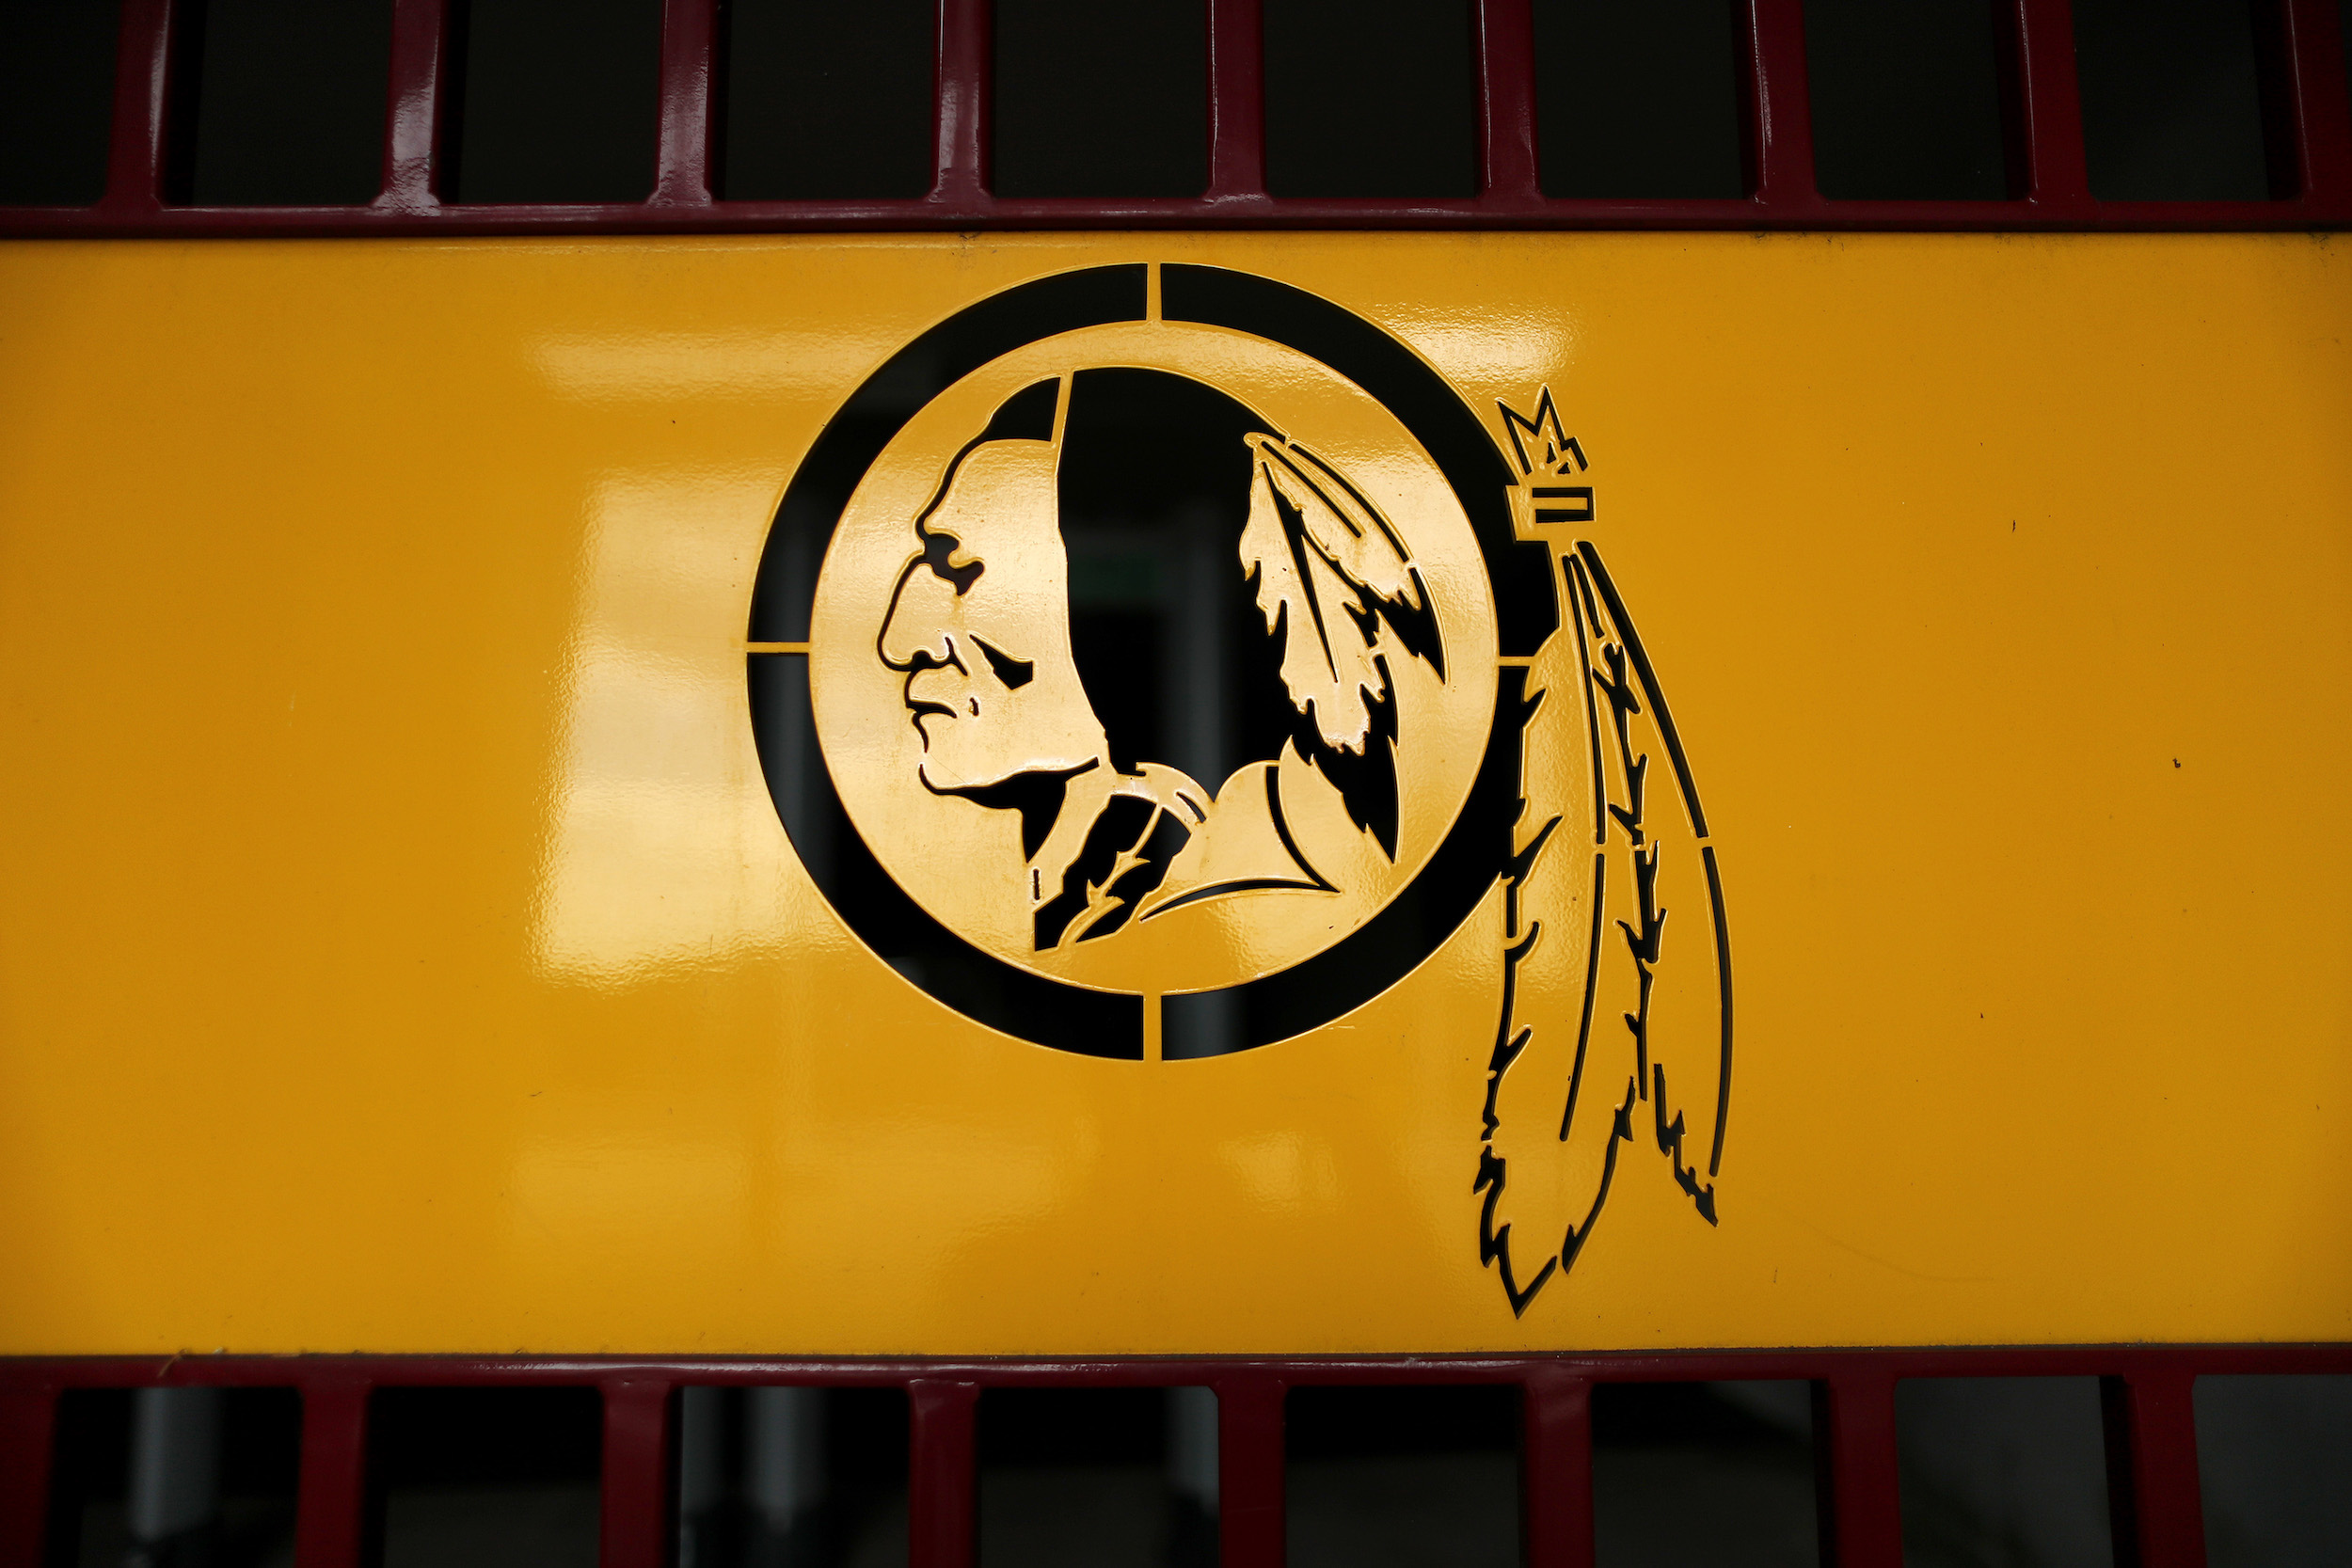 While the Washington Redskins are a thing of the past, there could already be some issues with the Washington Red Tails.